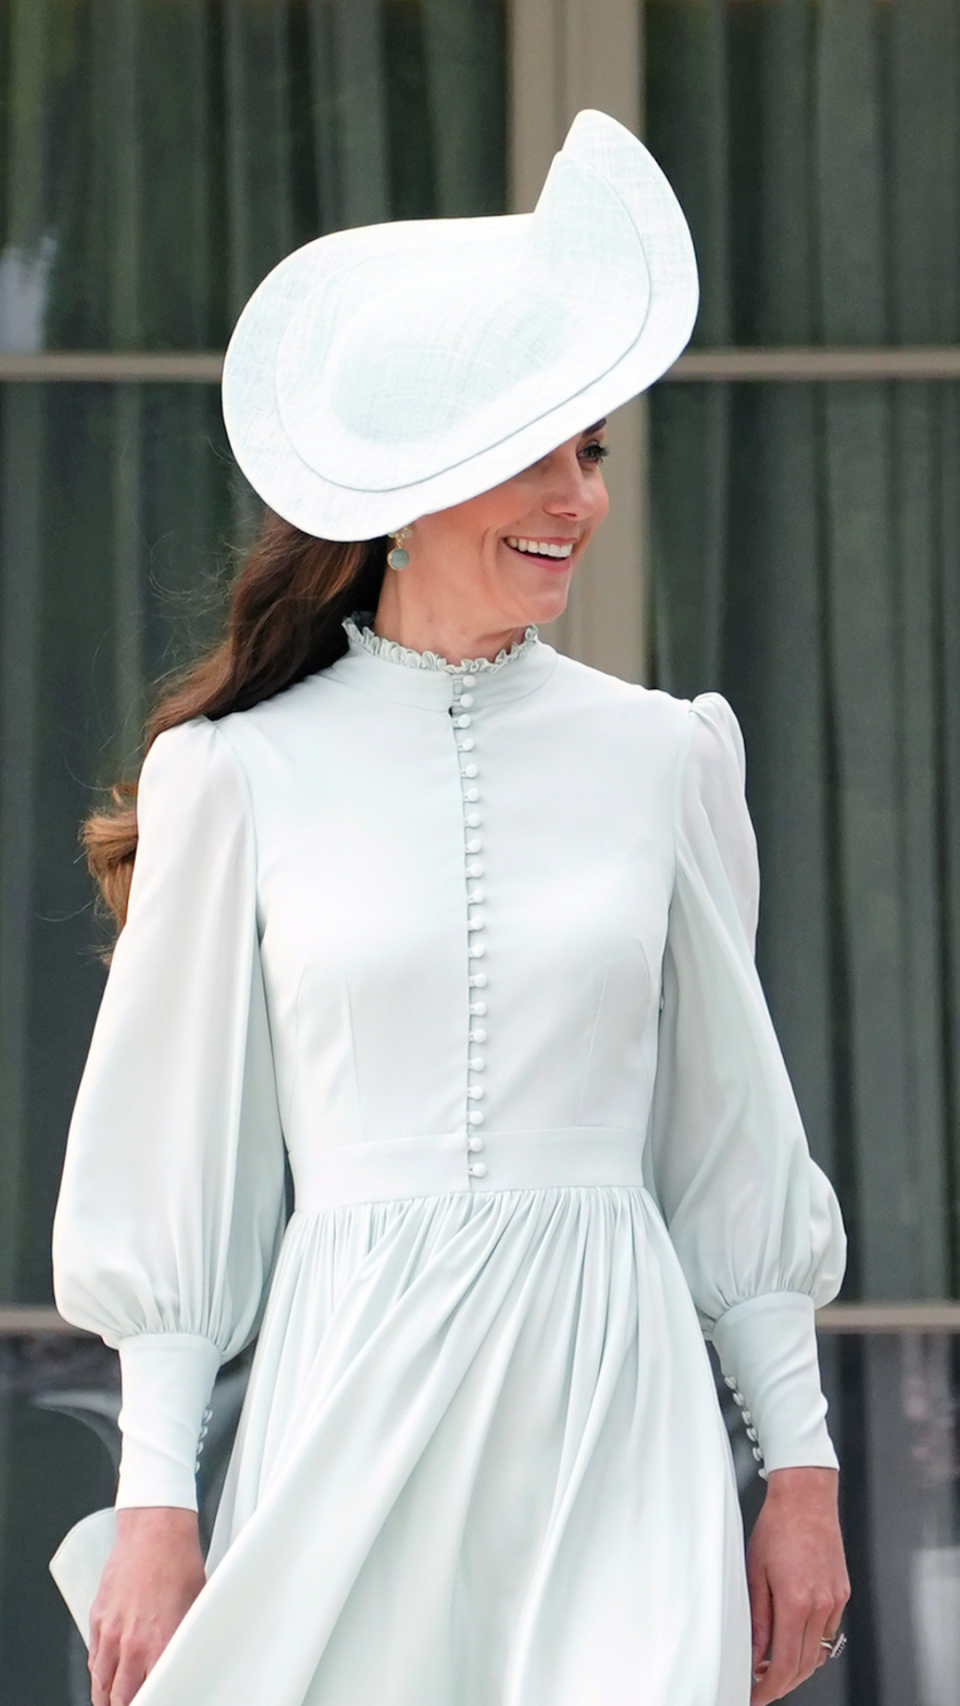 Oversized for a Royal Garden Party